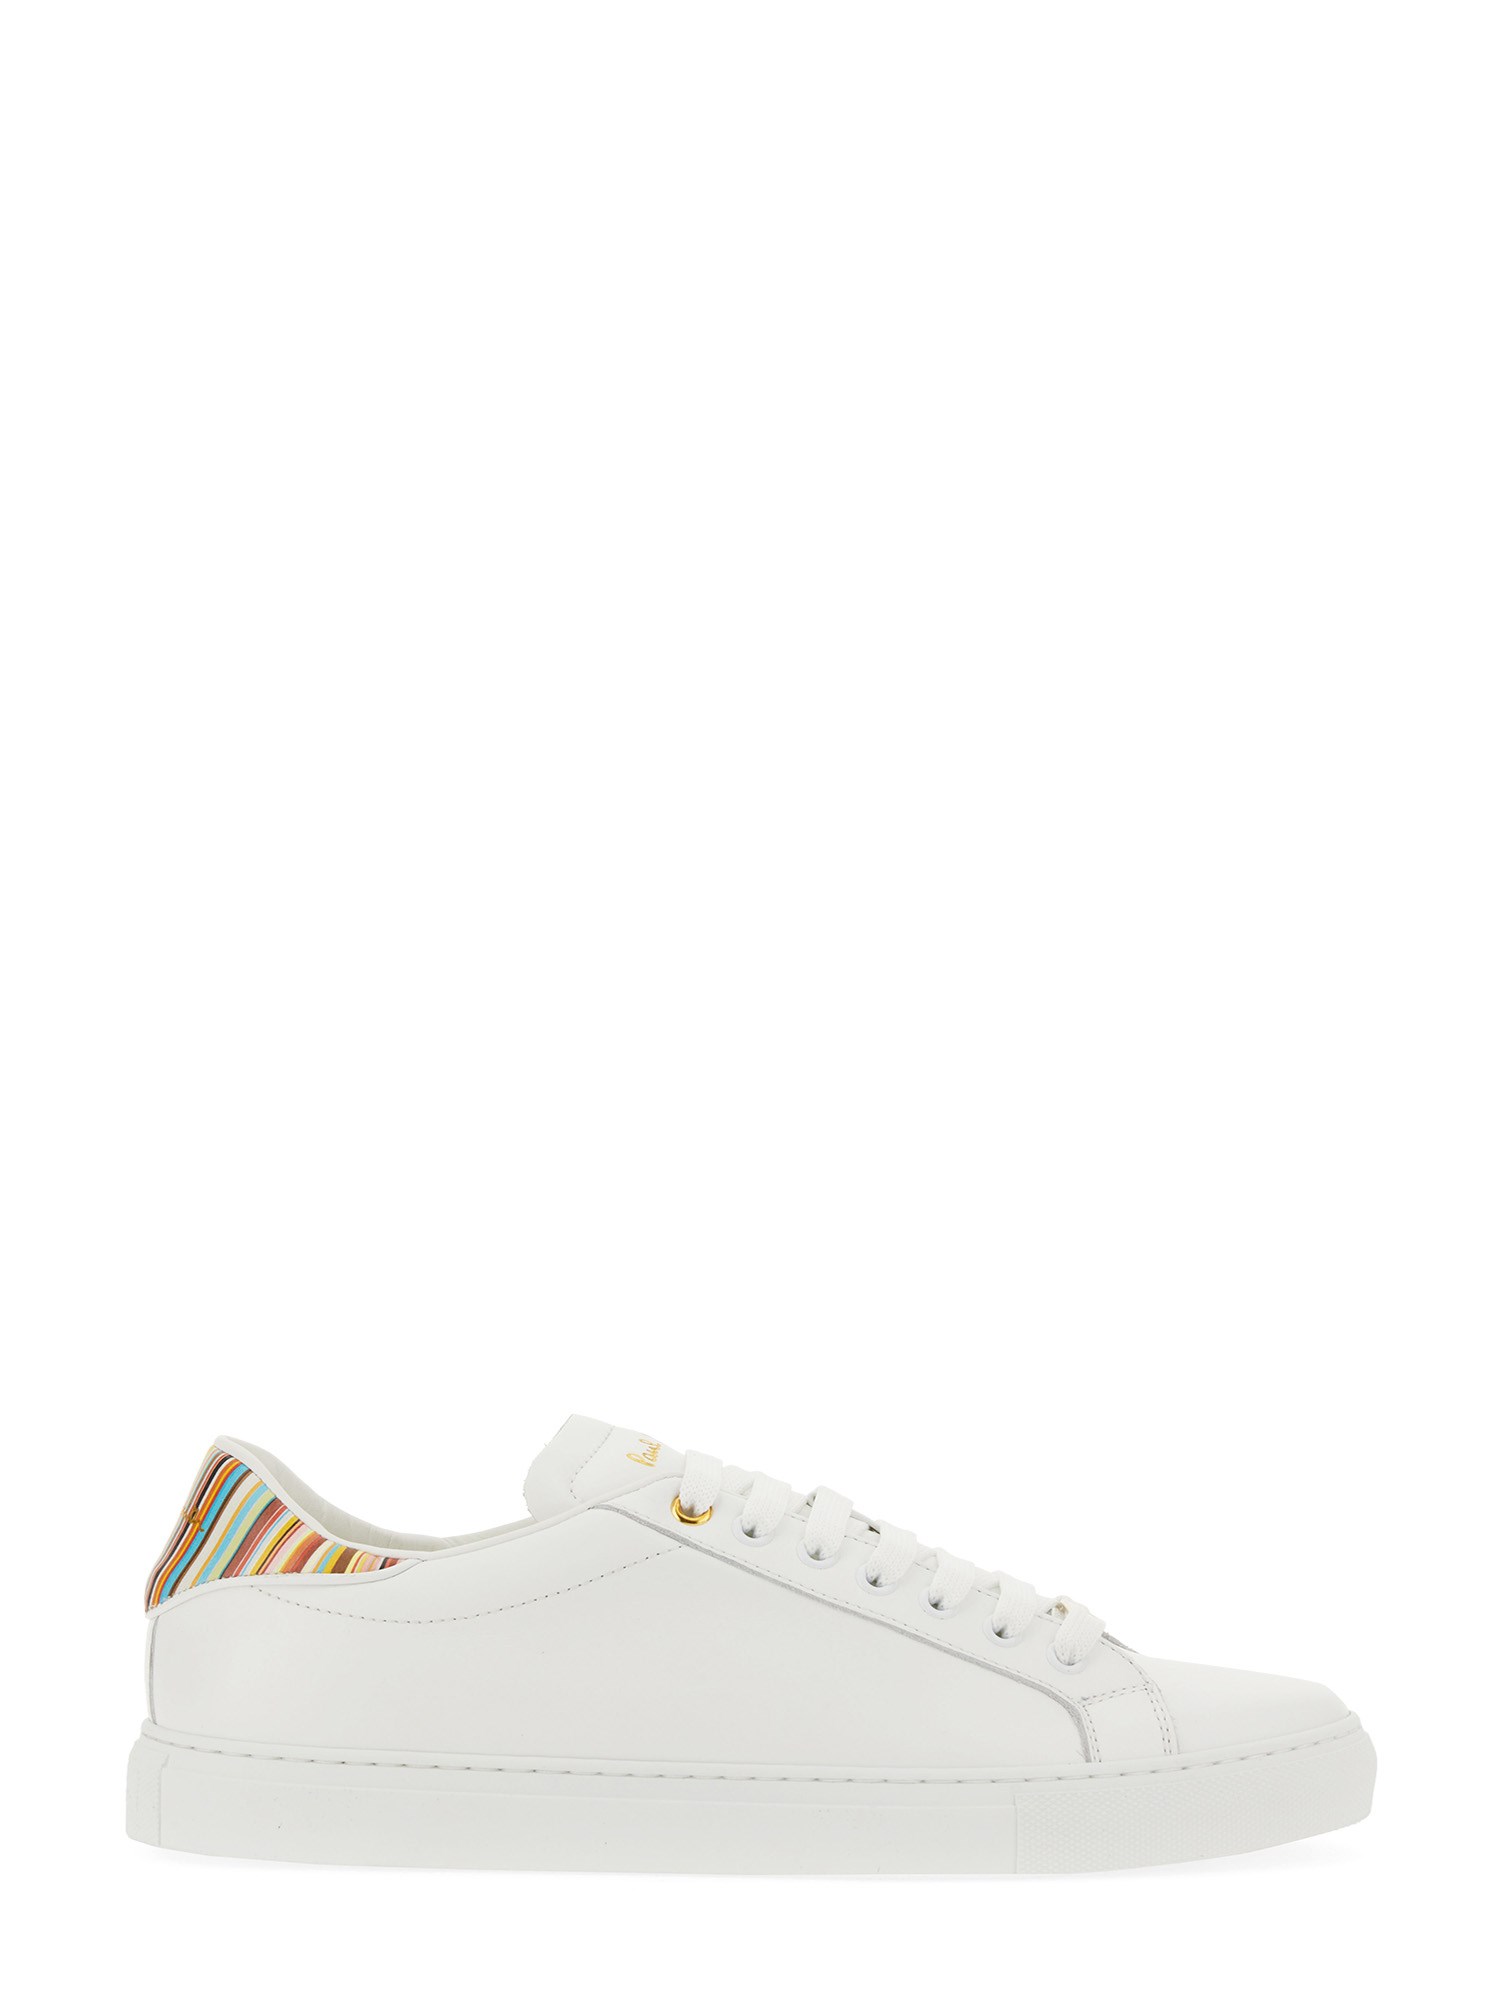 PAUL SMITH SNEAKER WITH LOGO